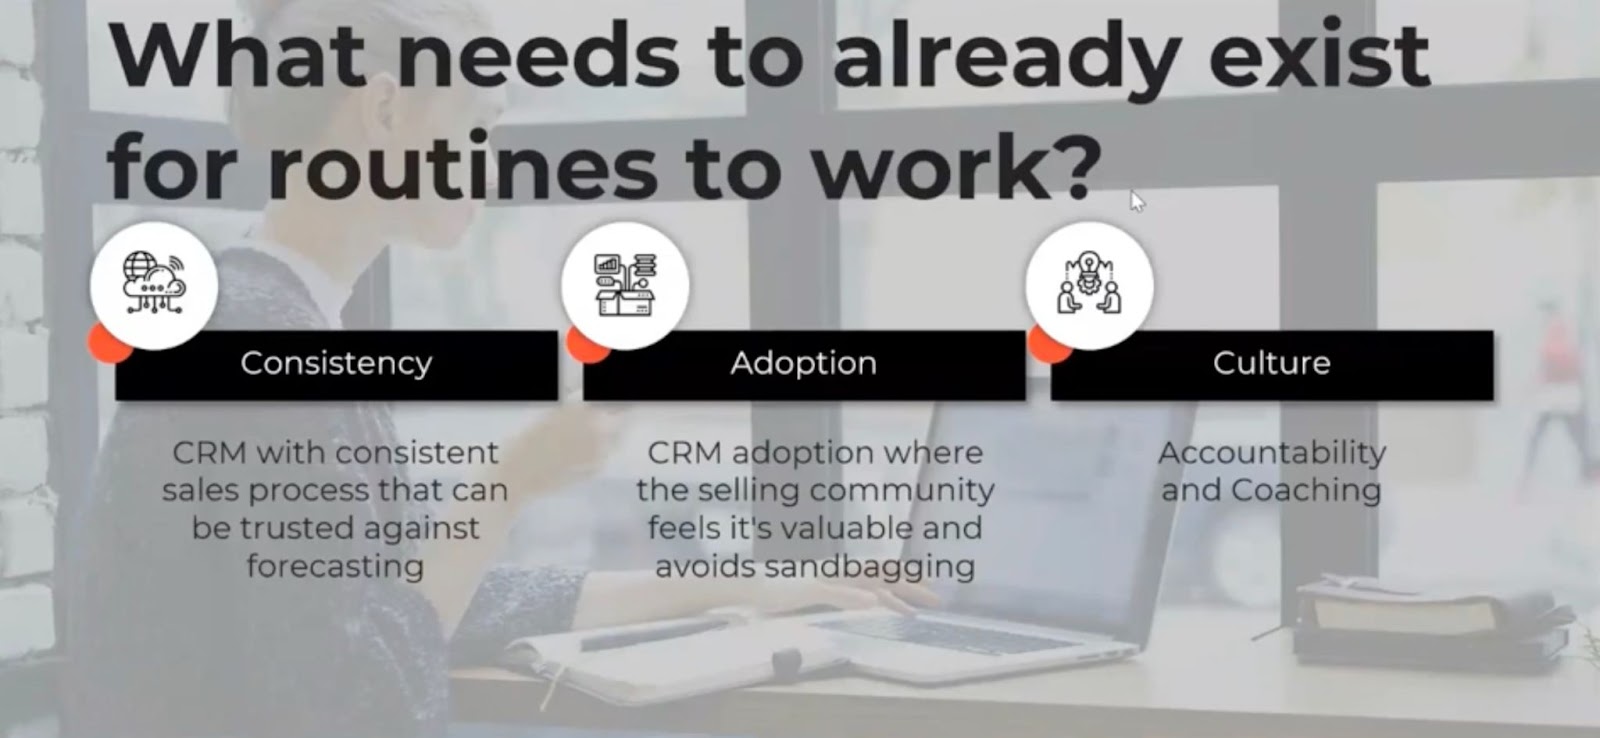 An image with the following text: What needs to already exist for routines to work? Consistency - CRM with consistent sales process that can be trusted against forecasting. Adoption - CRM adoption where the selling community feels it's valuable and avoids sandbagging. Culture - Accountability and coaching